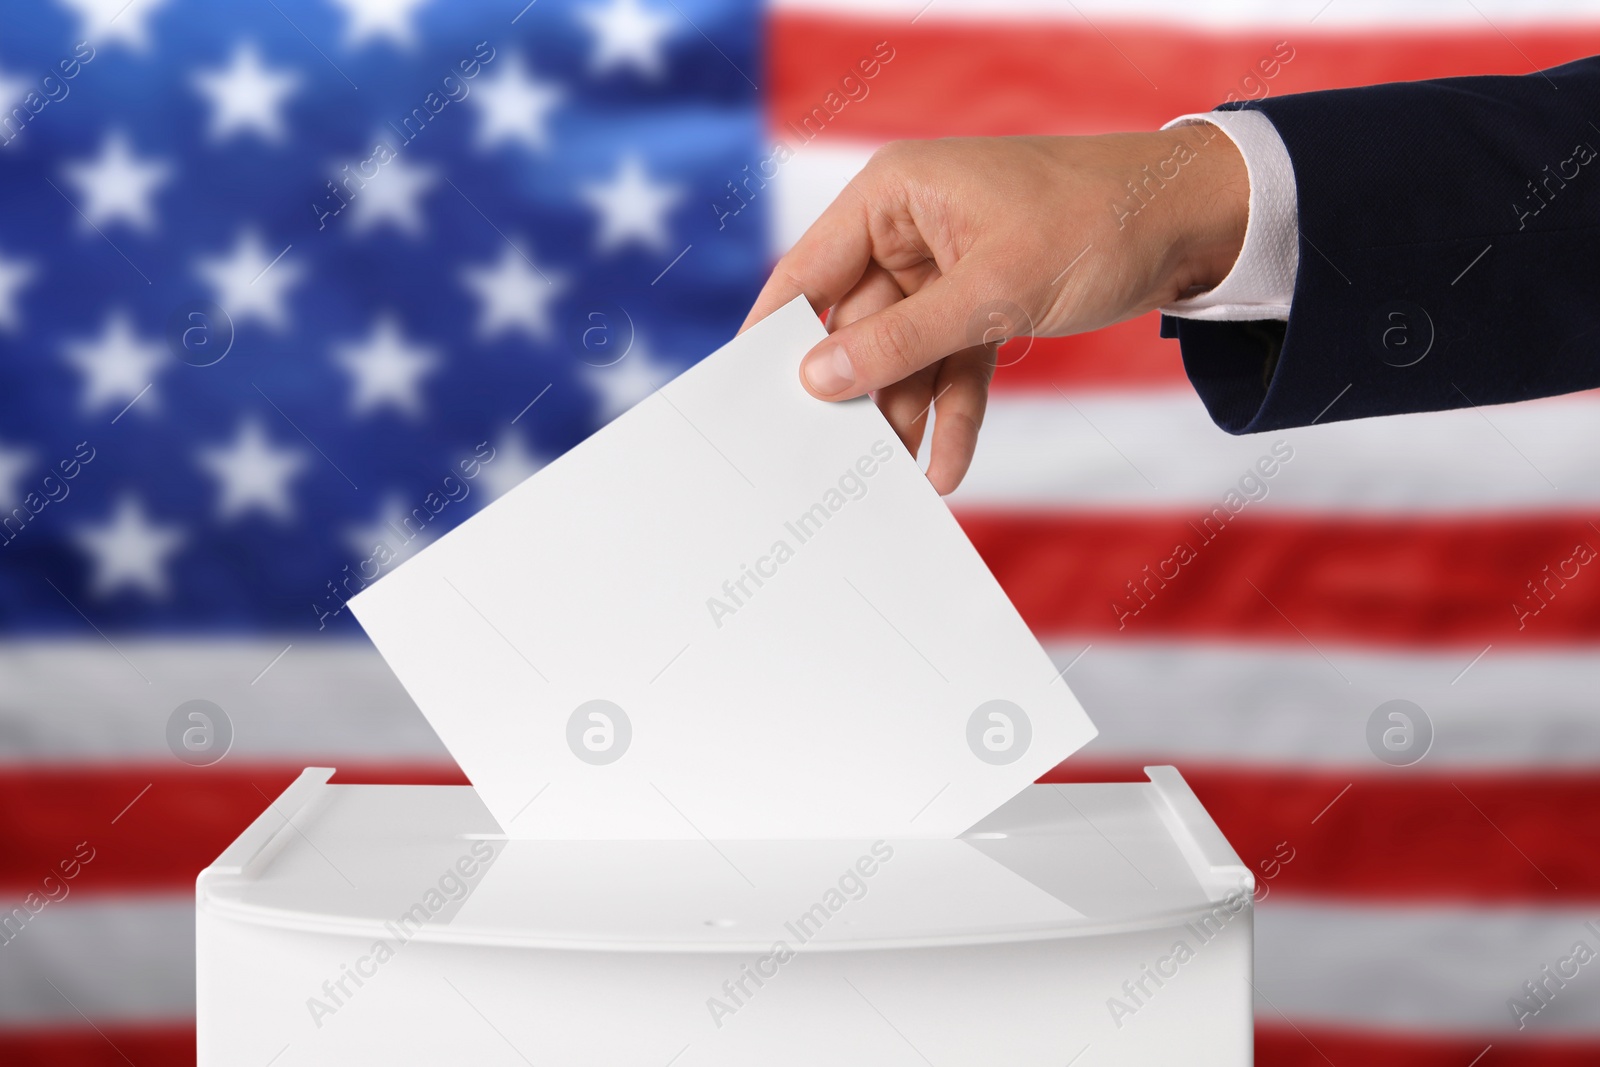 Image of Election in USA. Man putting his vote into ballot box against national flag of United States, closeup